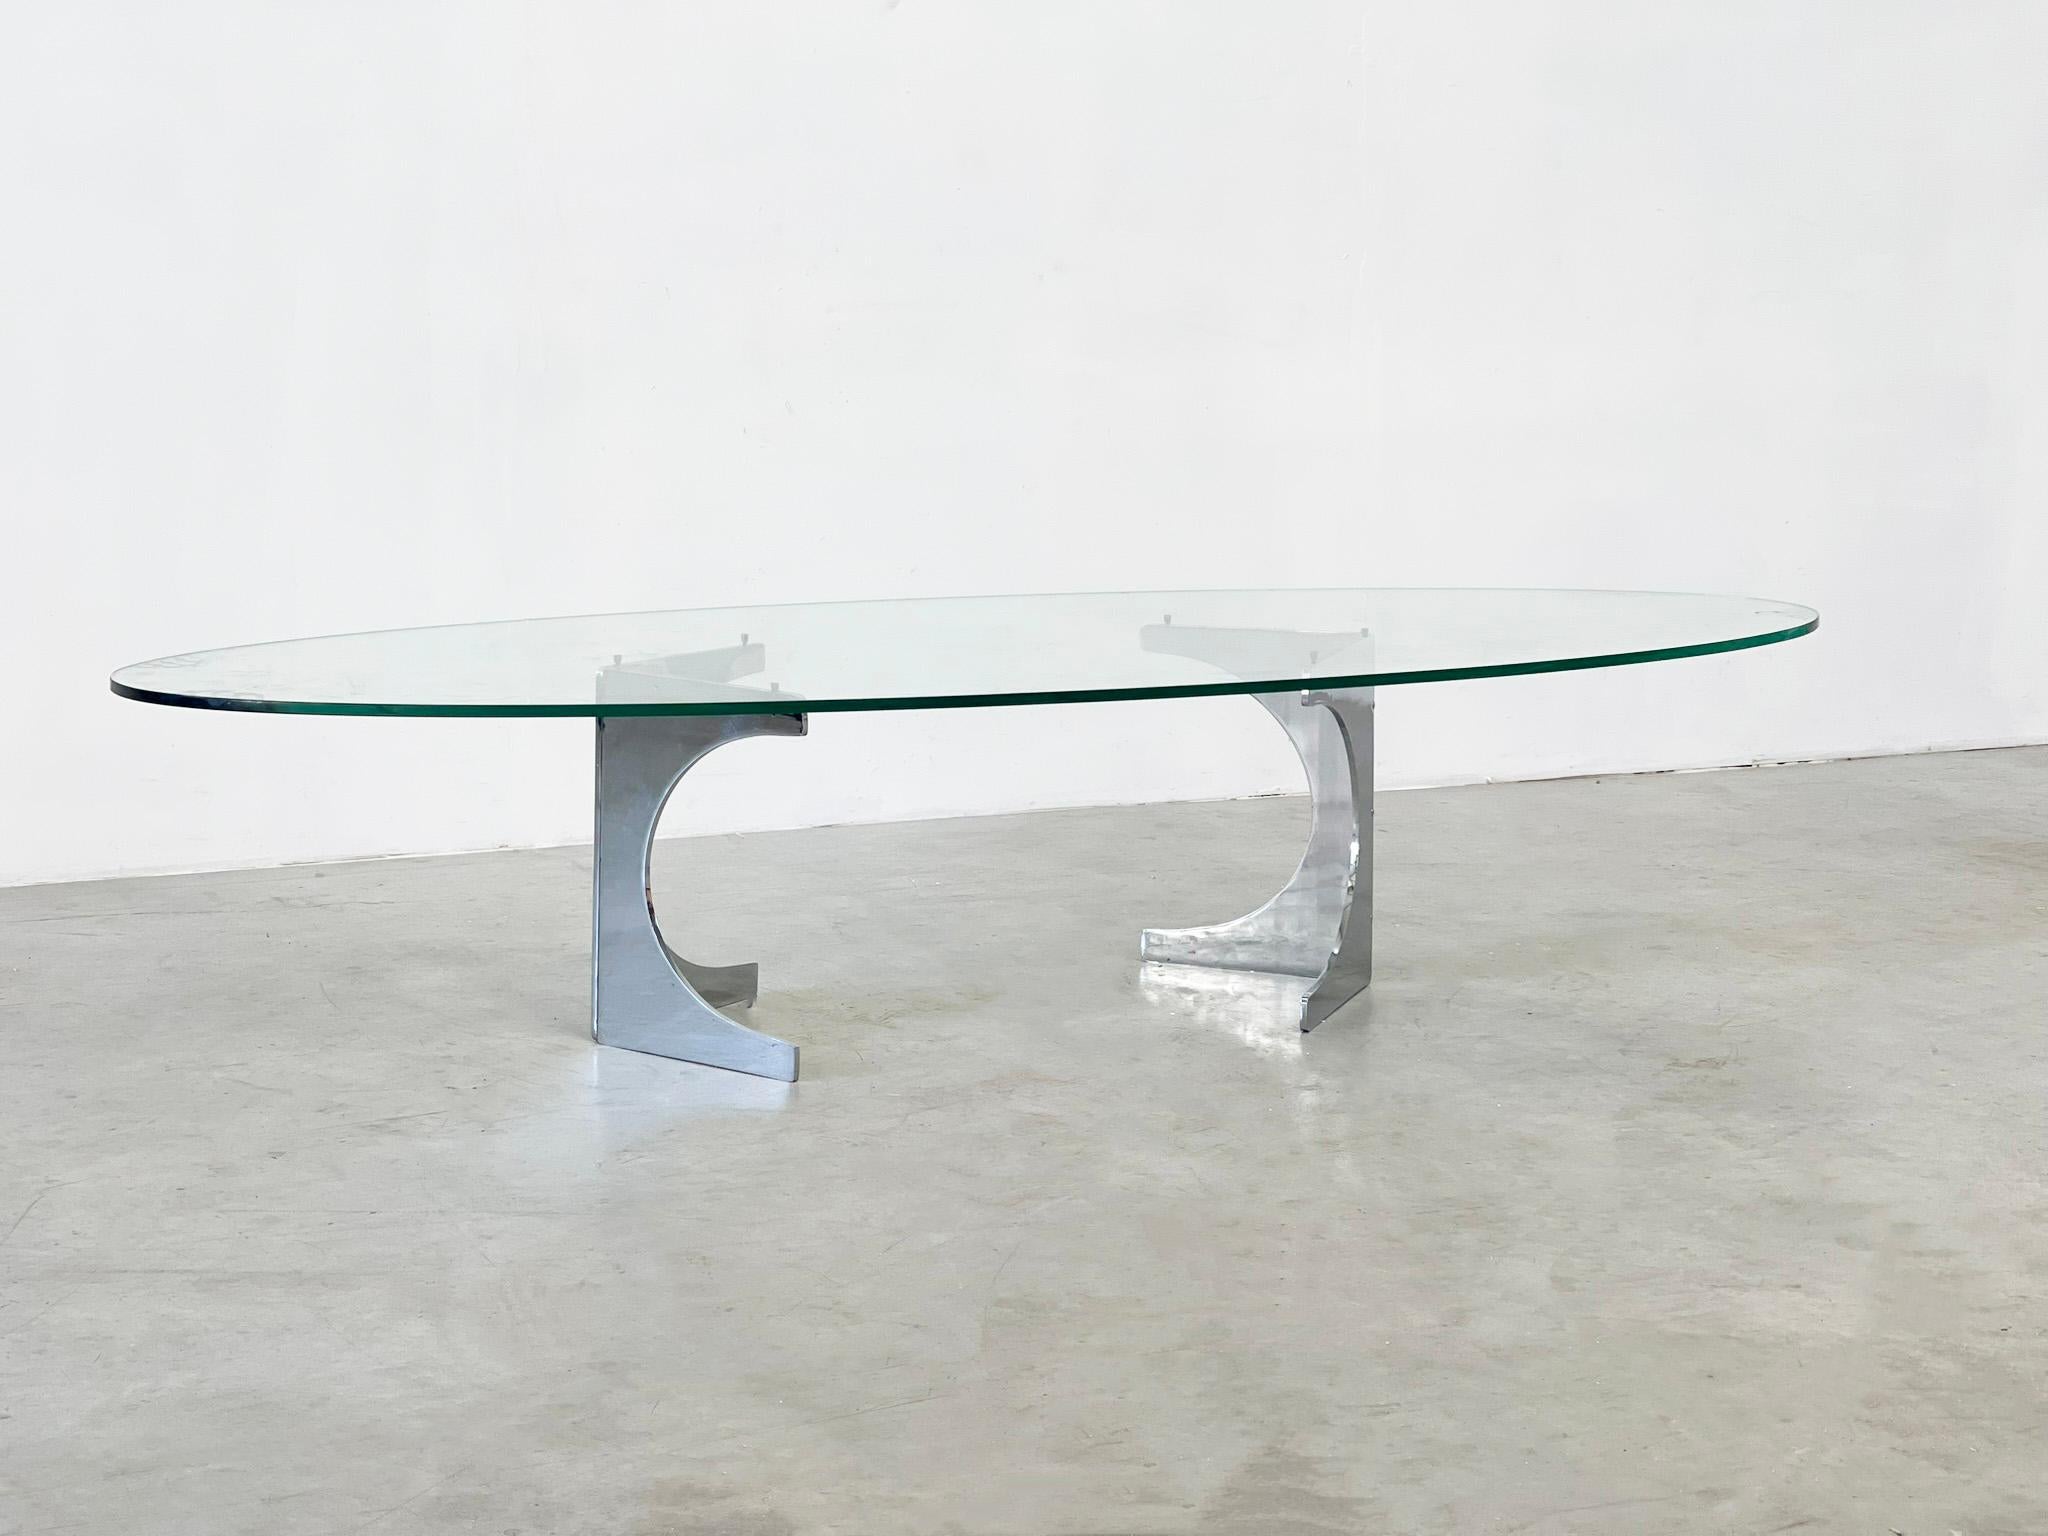 Nadine Effront coffee table
Elegant coffee table from the 80s.  This coffee table was designed in the 1980s by Nadine Effront. She is known for working with chromed pieces and often using them as the base for a coffee table. THE coffee table is a